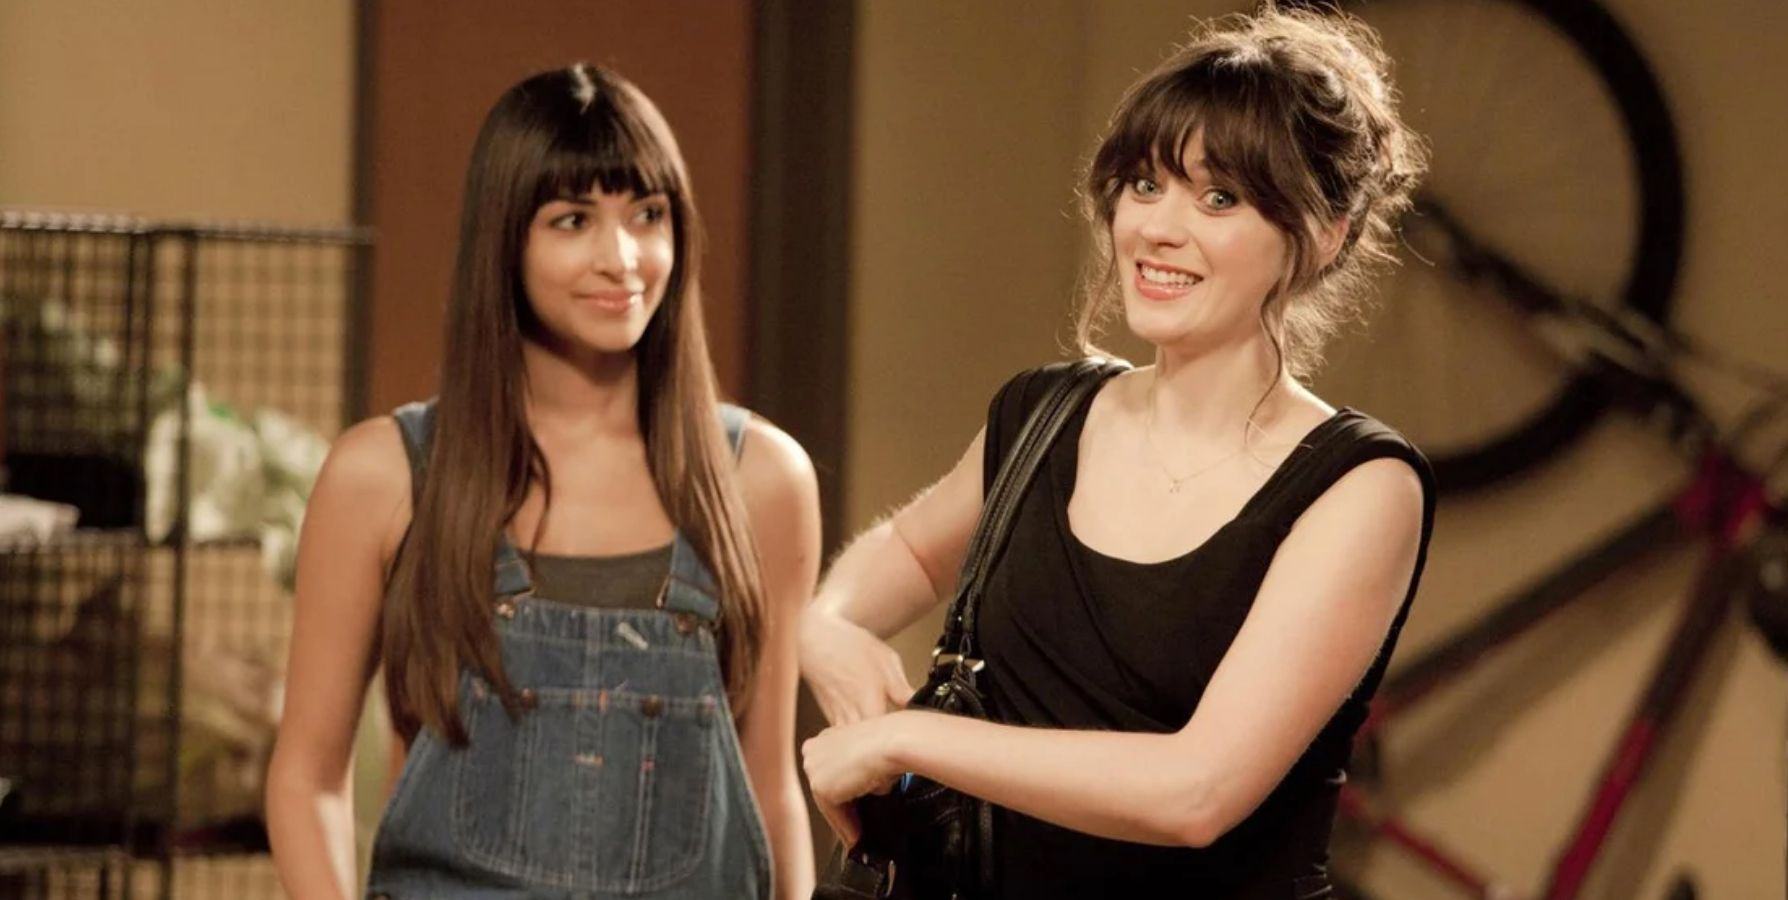 Cece in the overalls in the pilot New girl, Jess in the little black dress